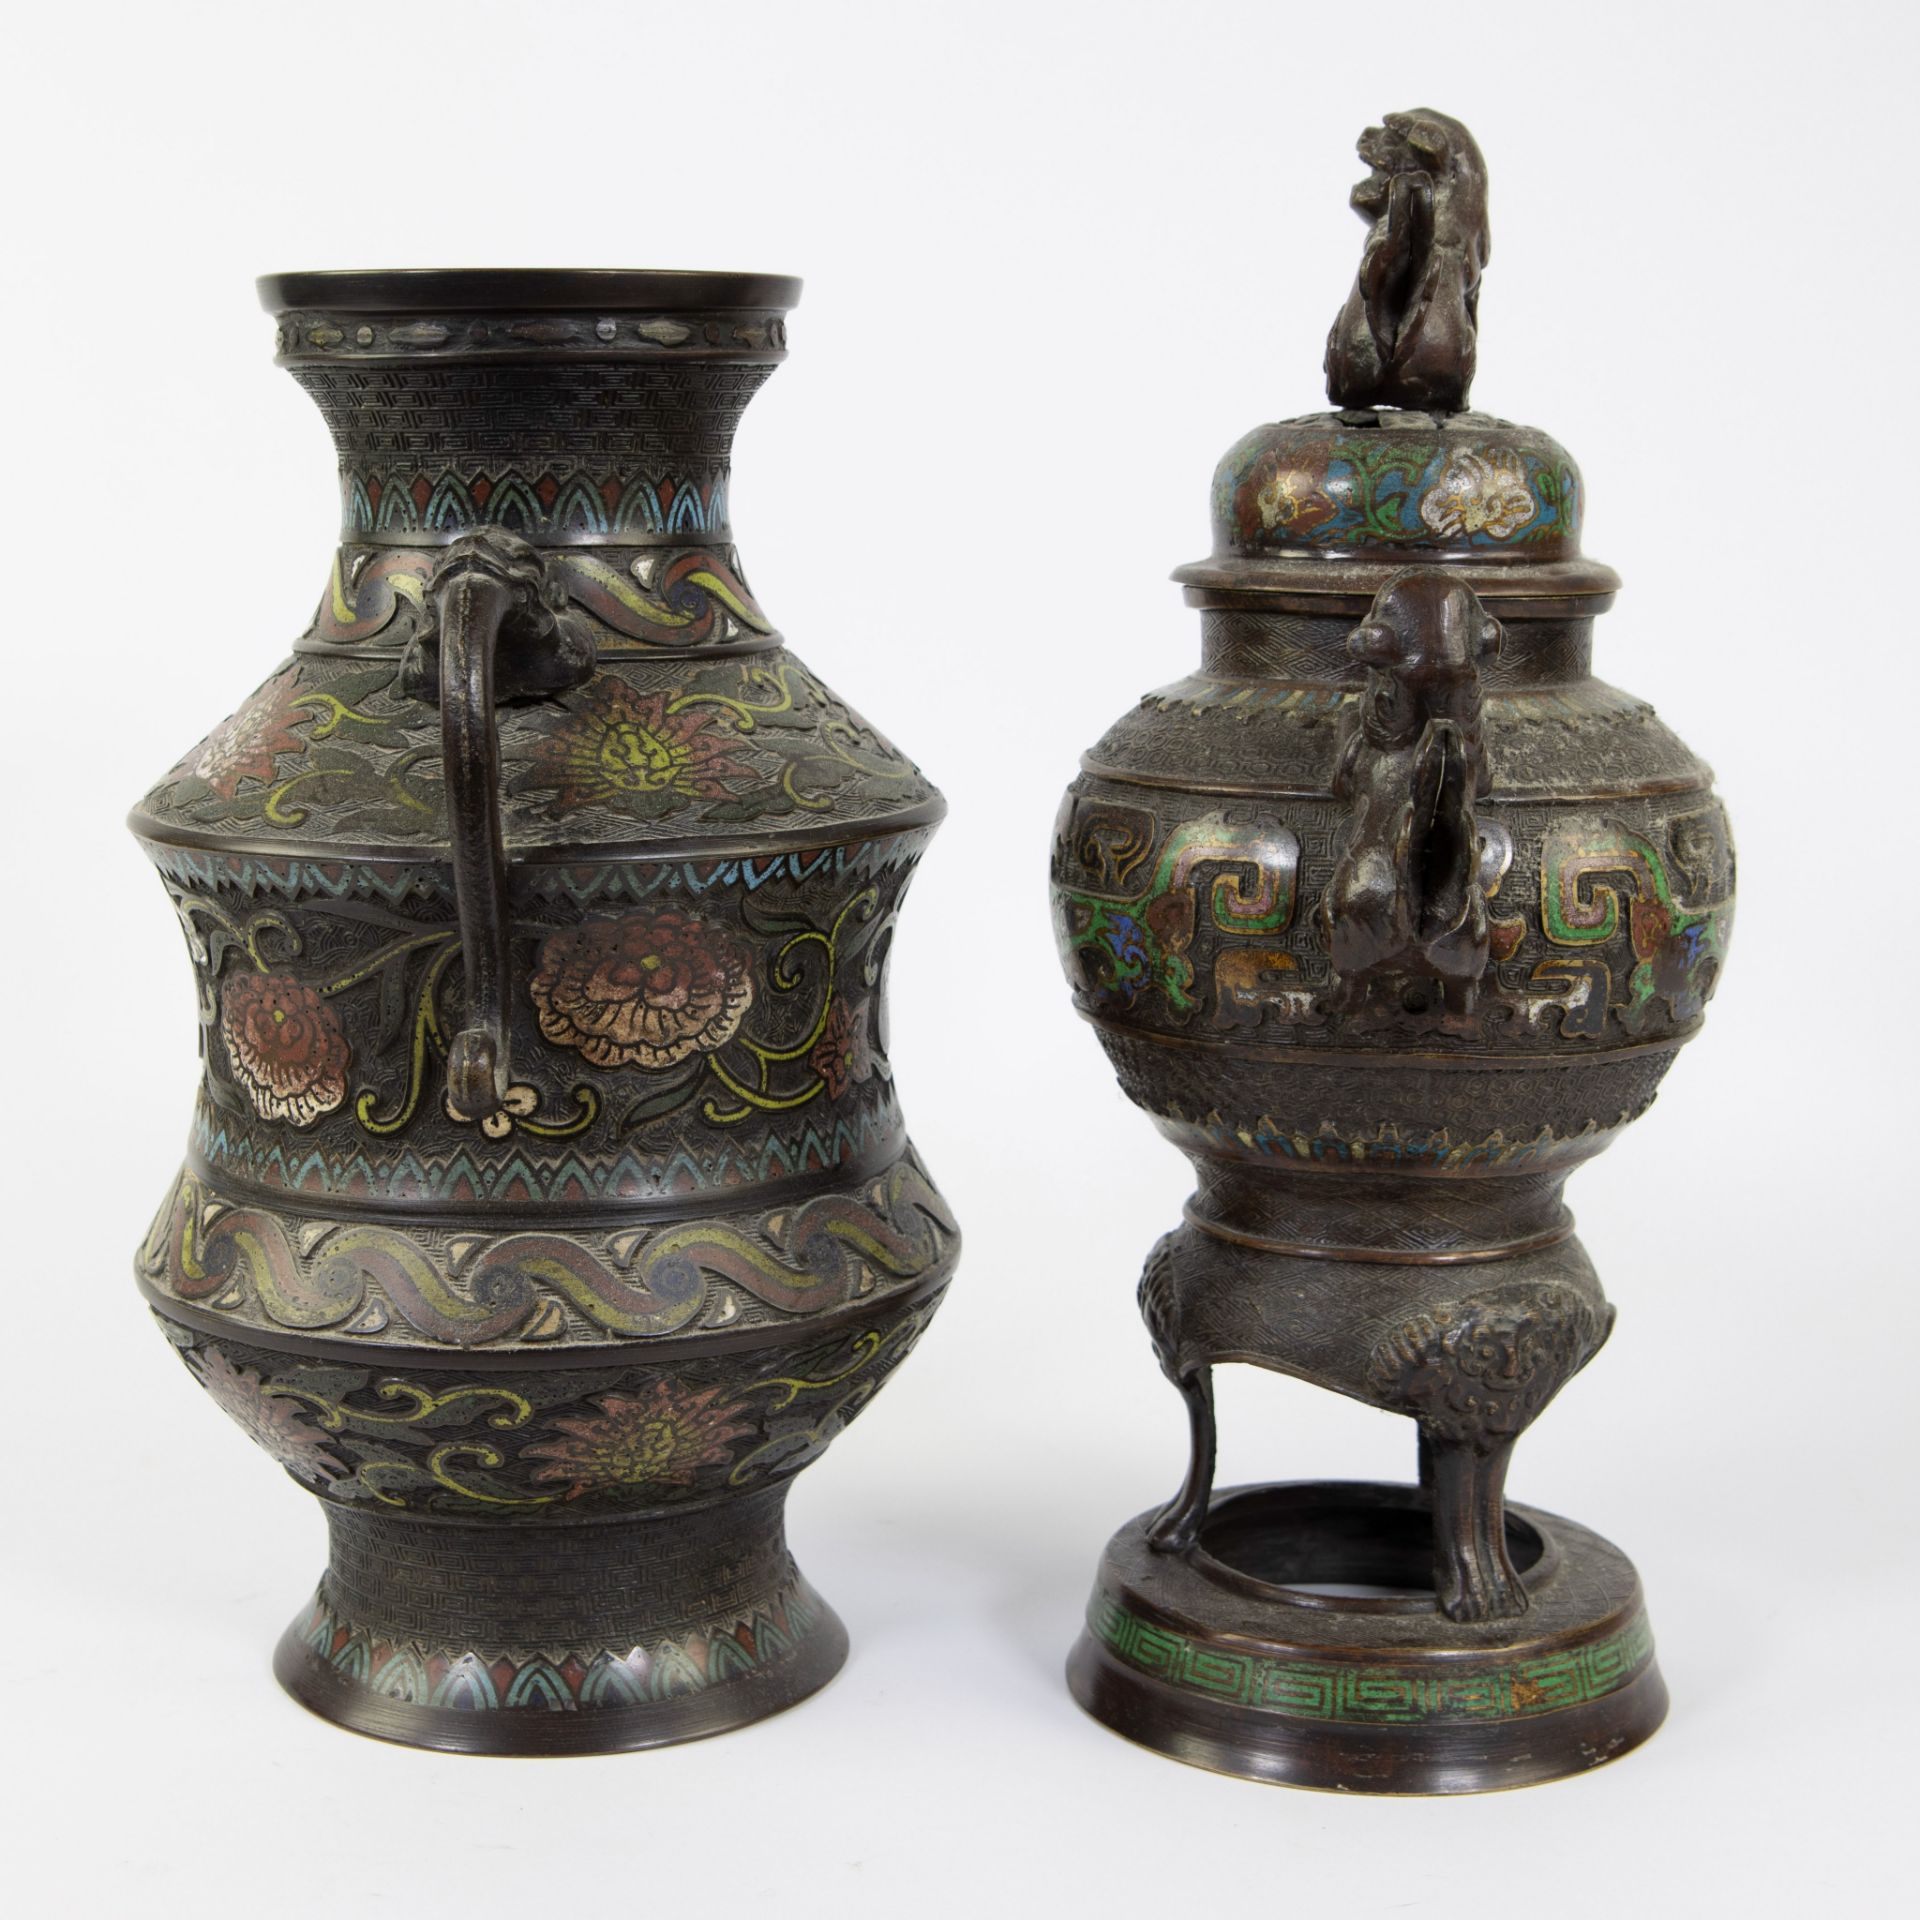 Japanese champlevé vase and incense burner, 19th century - Image 2 of 5